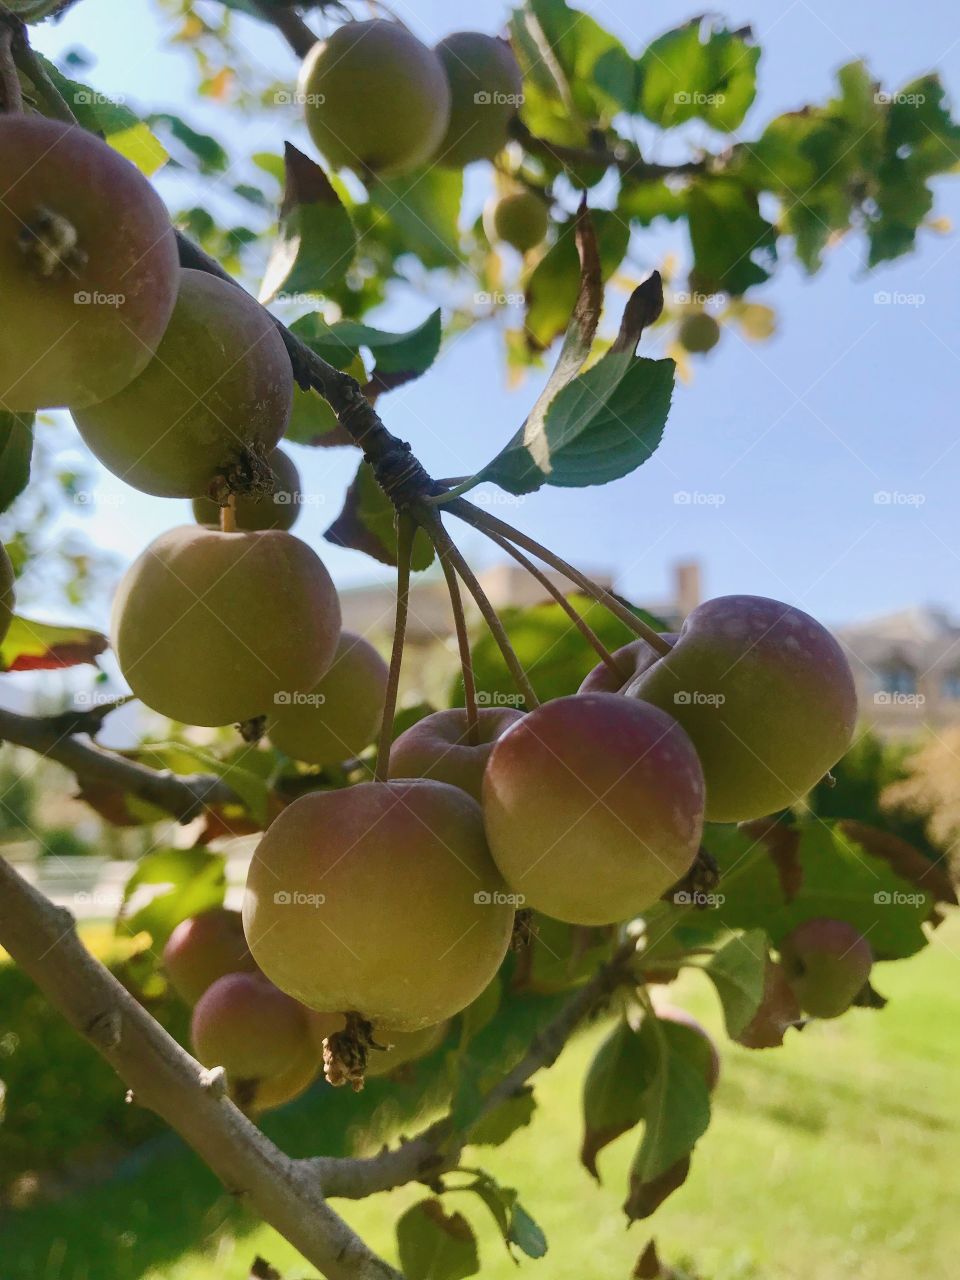 A bunch of small apples on the tree